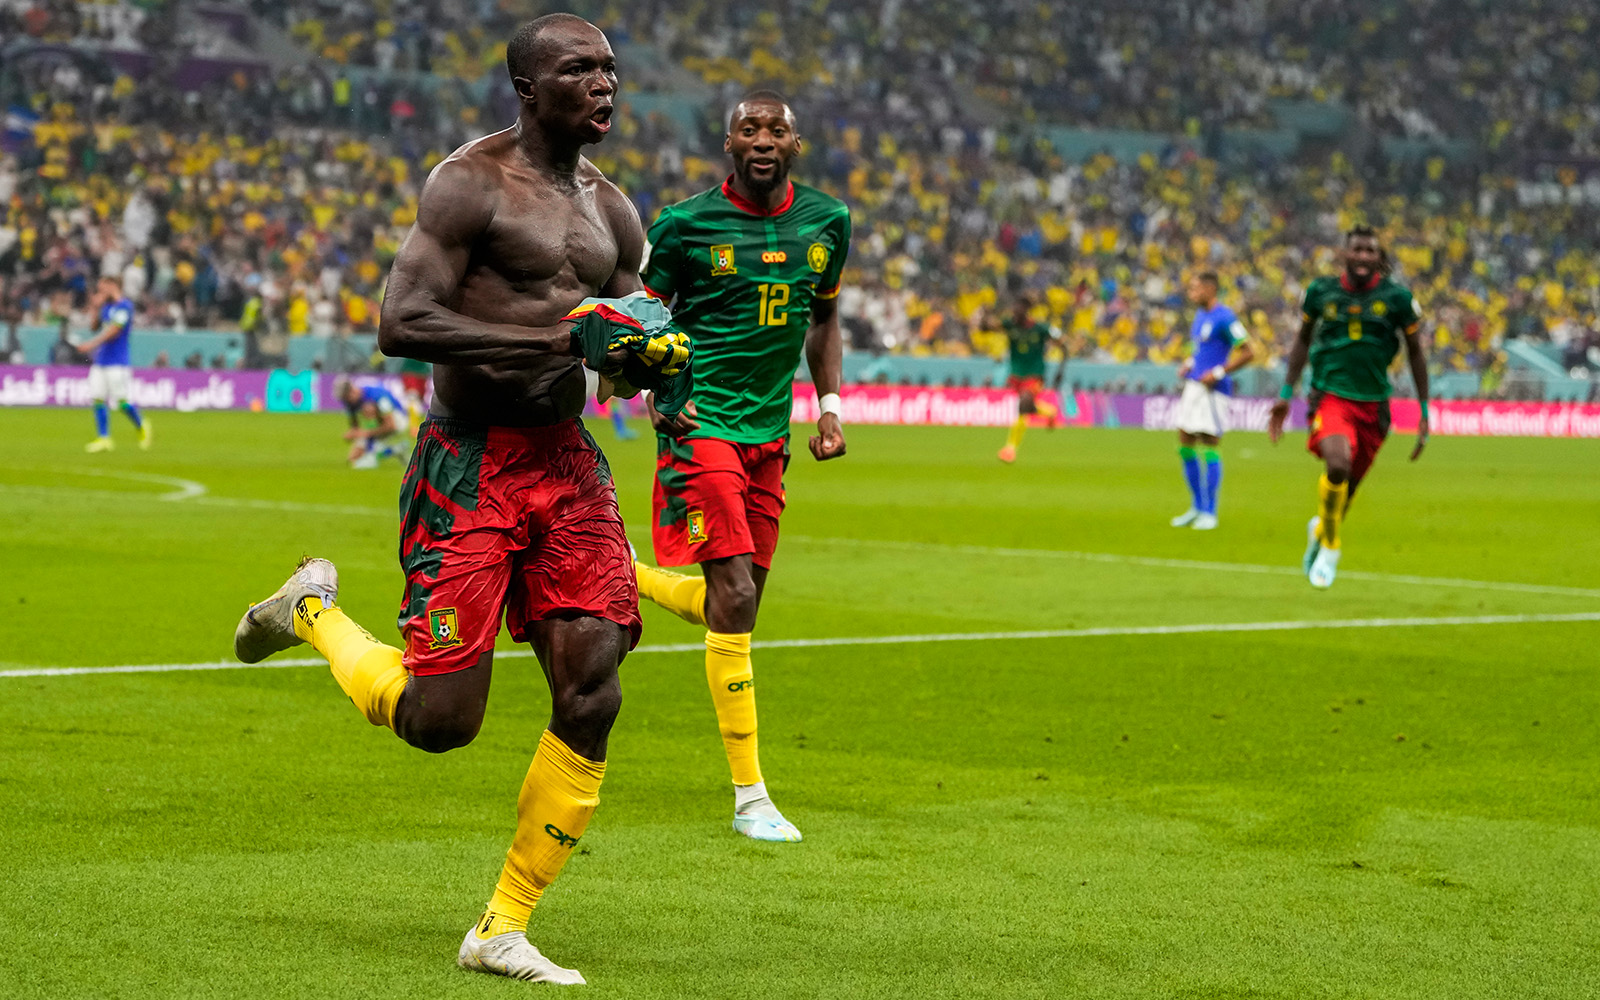 Brazil wins World Cup group despite historic 10 loss to Cameroon The